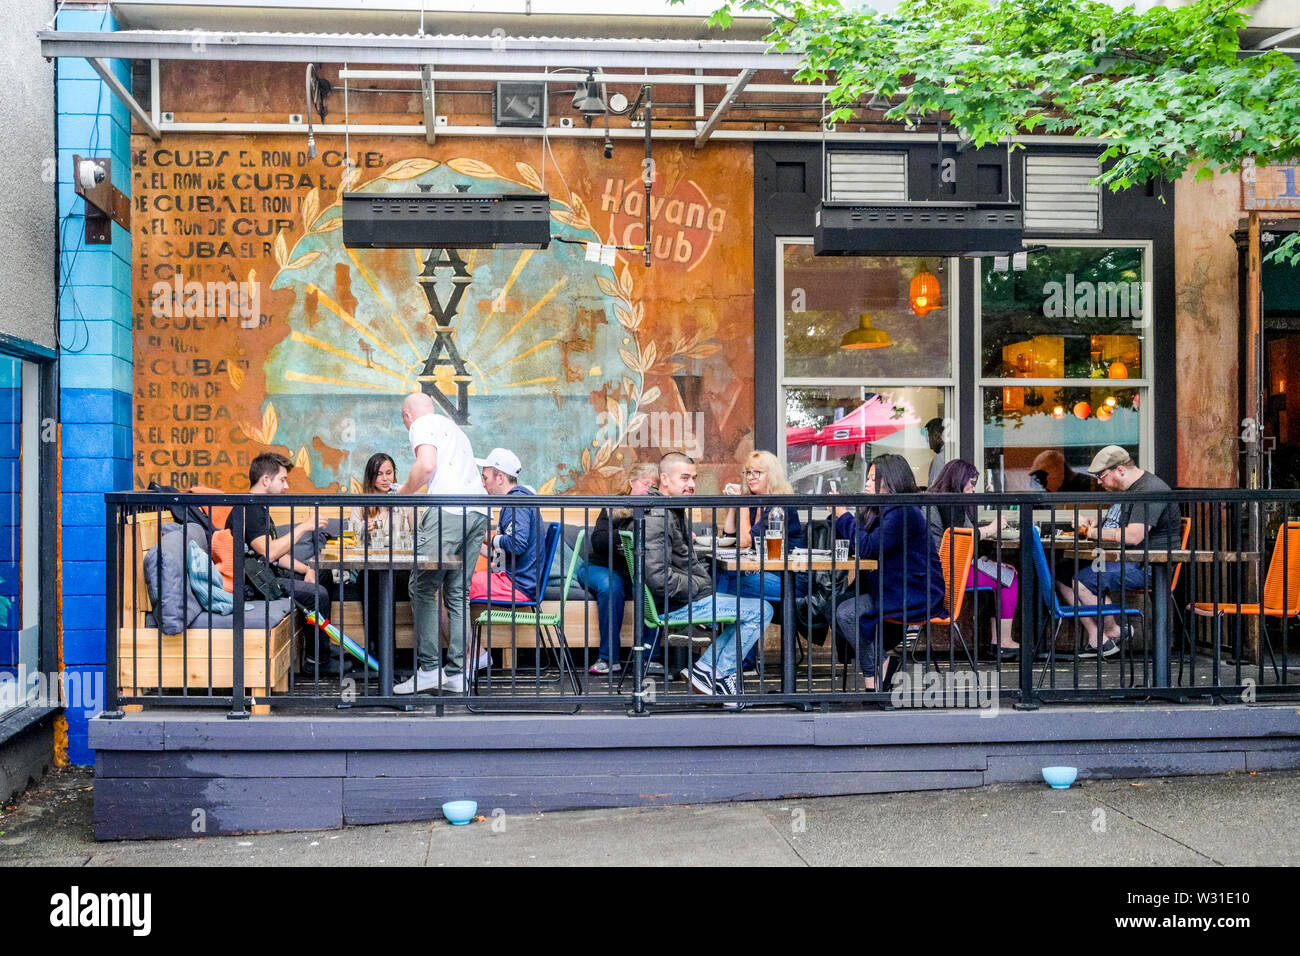 Commercial Drive Vancouver High Resolution Stock Photography And Images Alamy